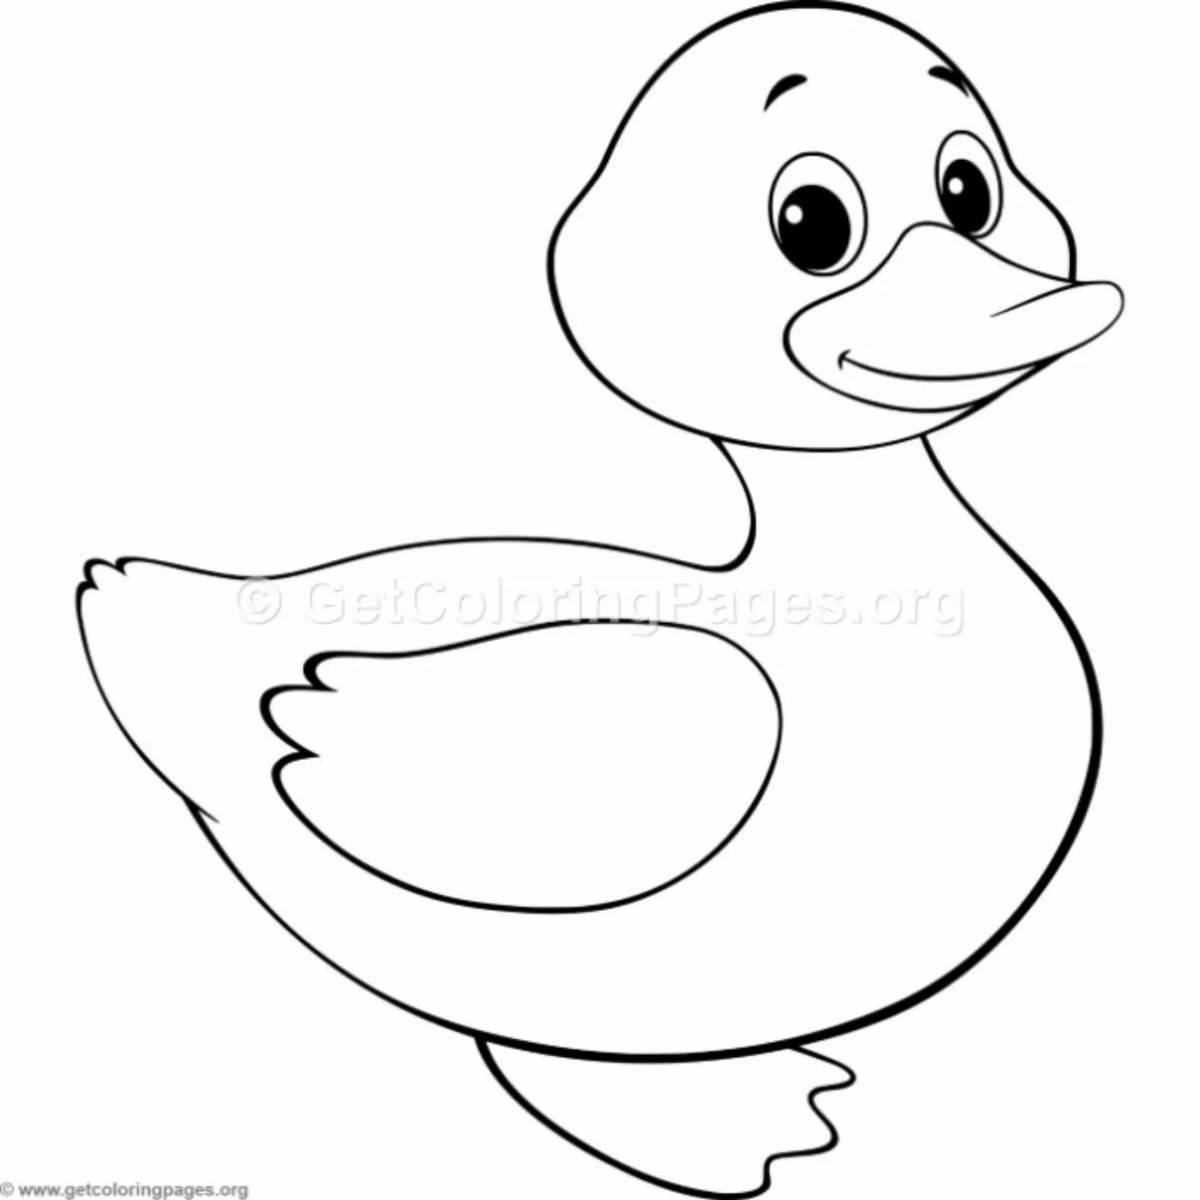 Amazing Dymkovo duck coloring book for kids